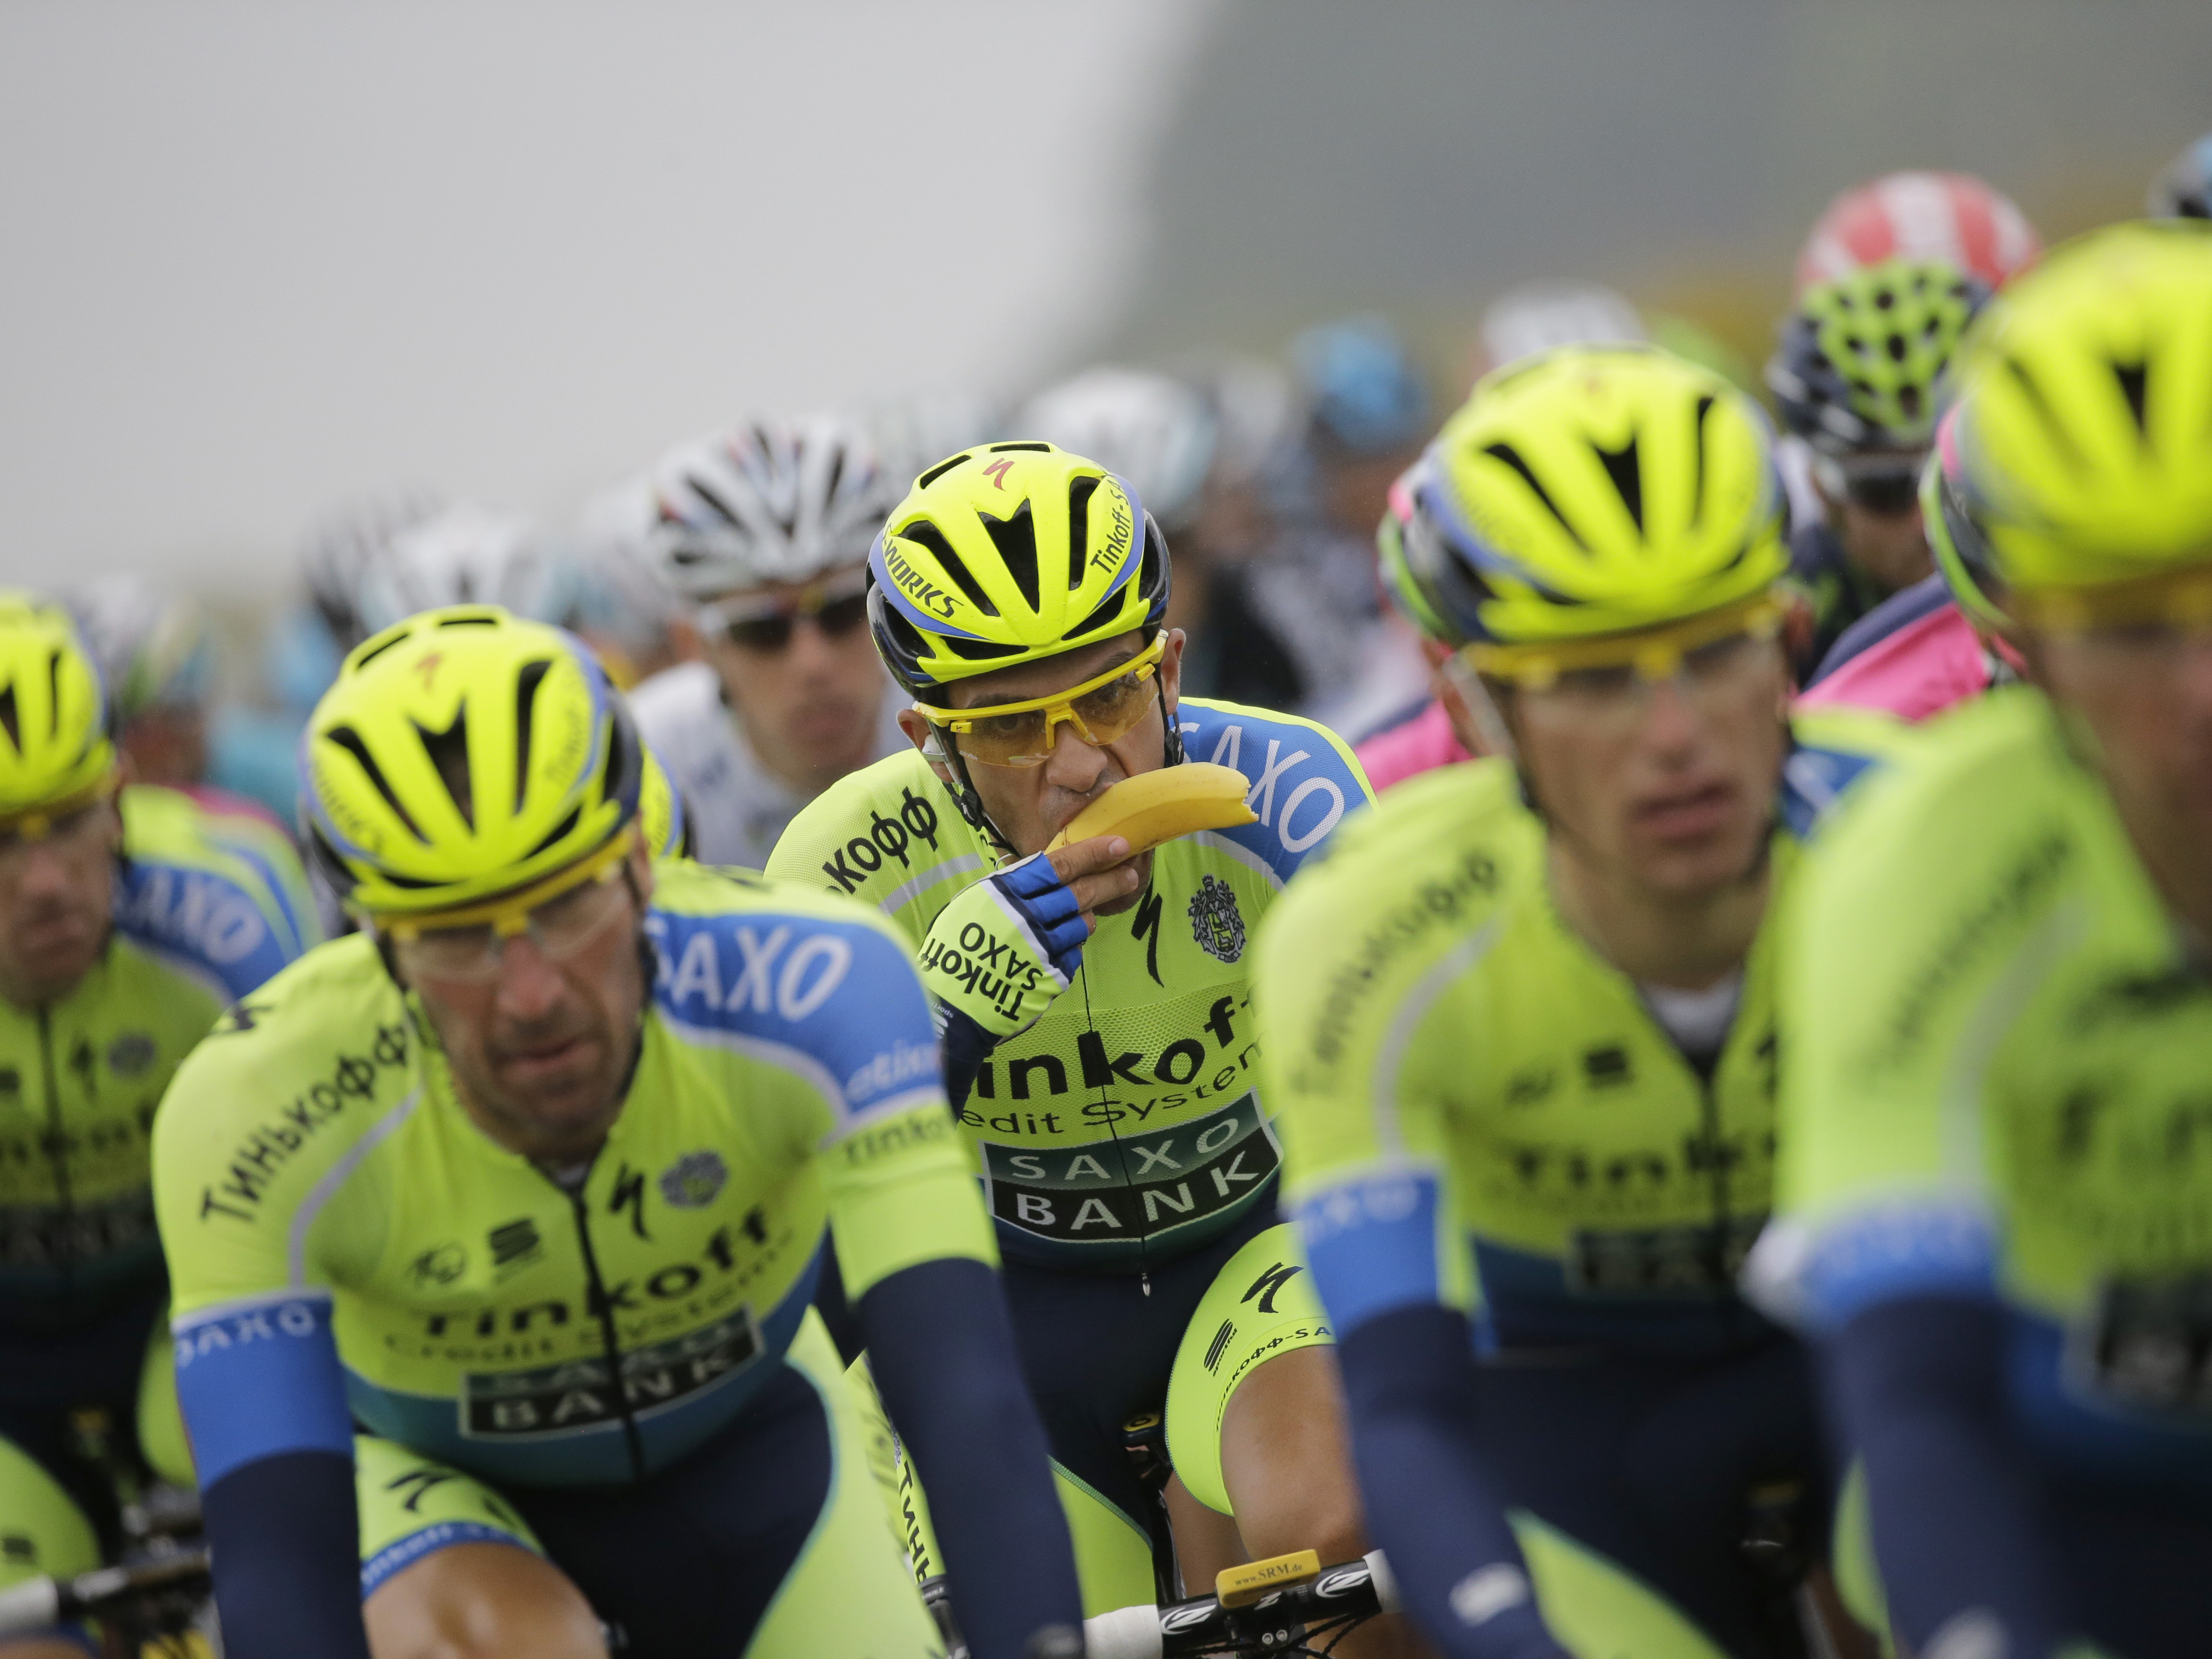 Spain's Alberto Contador eats a banana in as he rides in the pack during the sixth stage of the Tour de France on July 10, 2014. The cyclists aim to eat up to 350 calories an hour as they ride, and up to 9,000 calories a day. Photo: Laurent Cipriani/AP